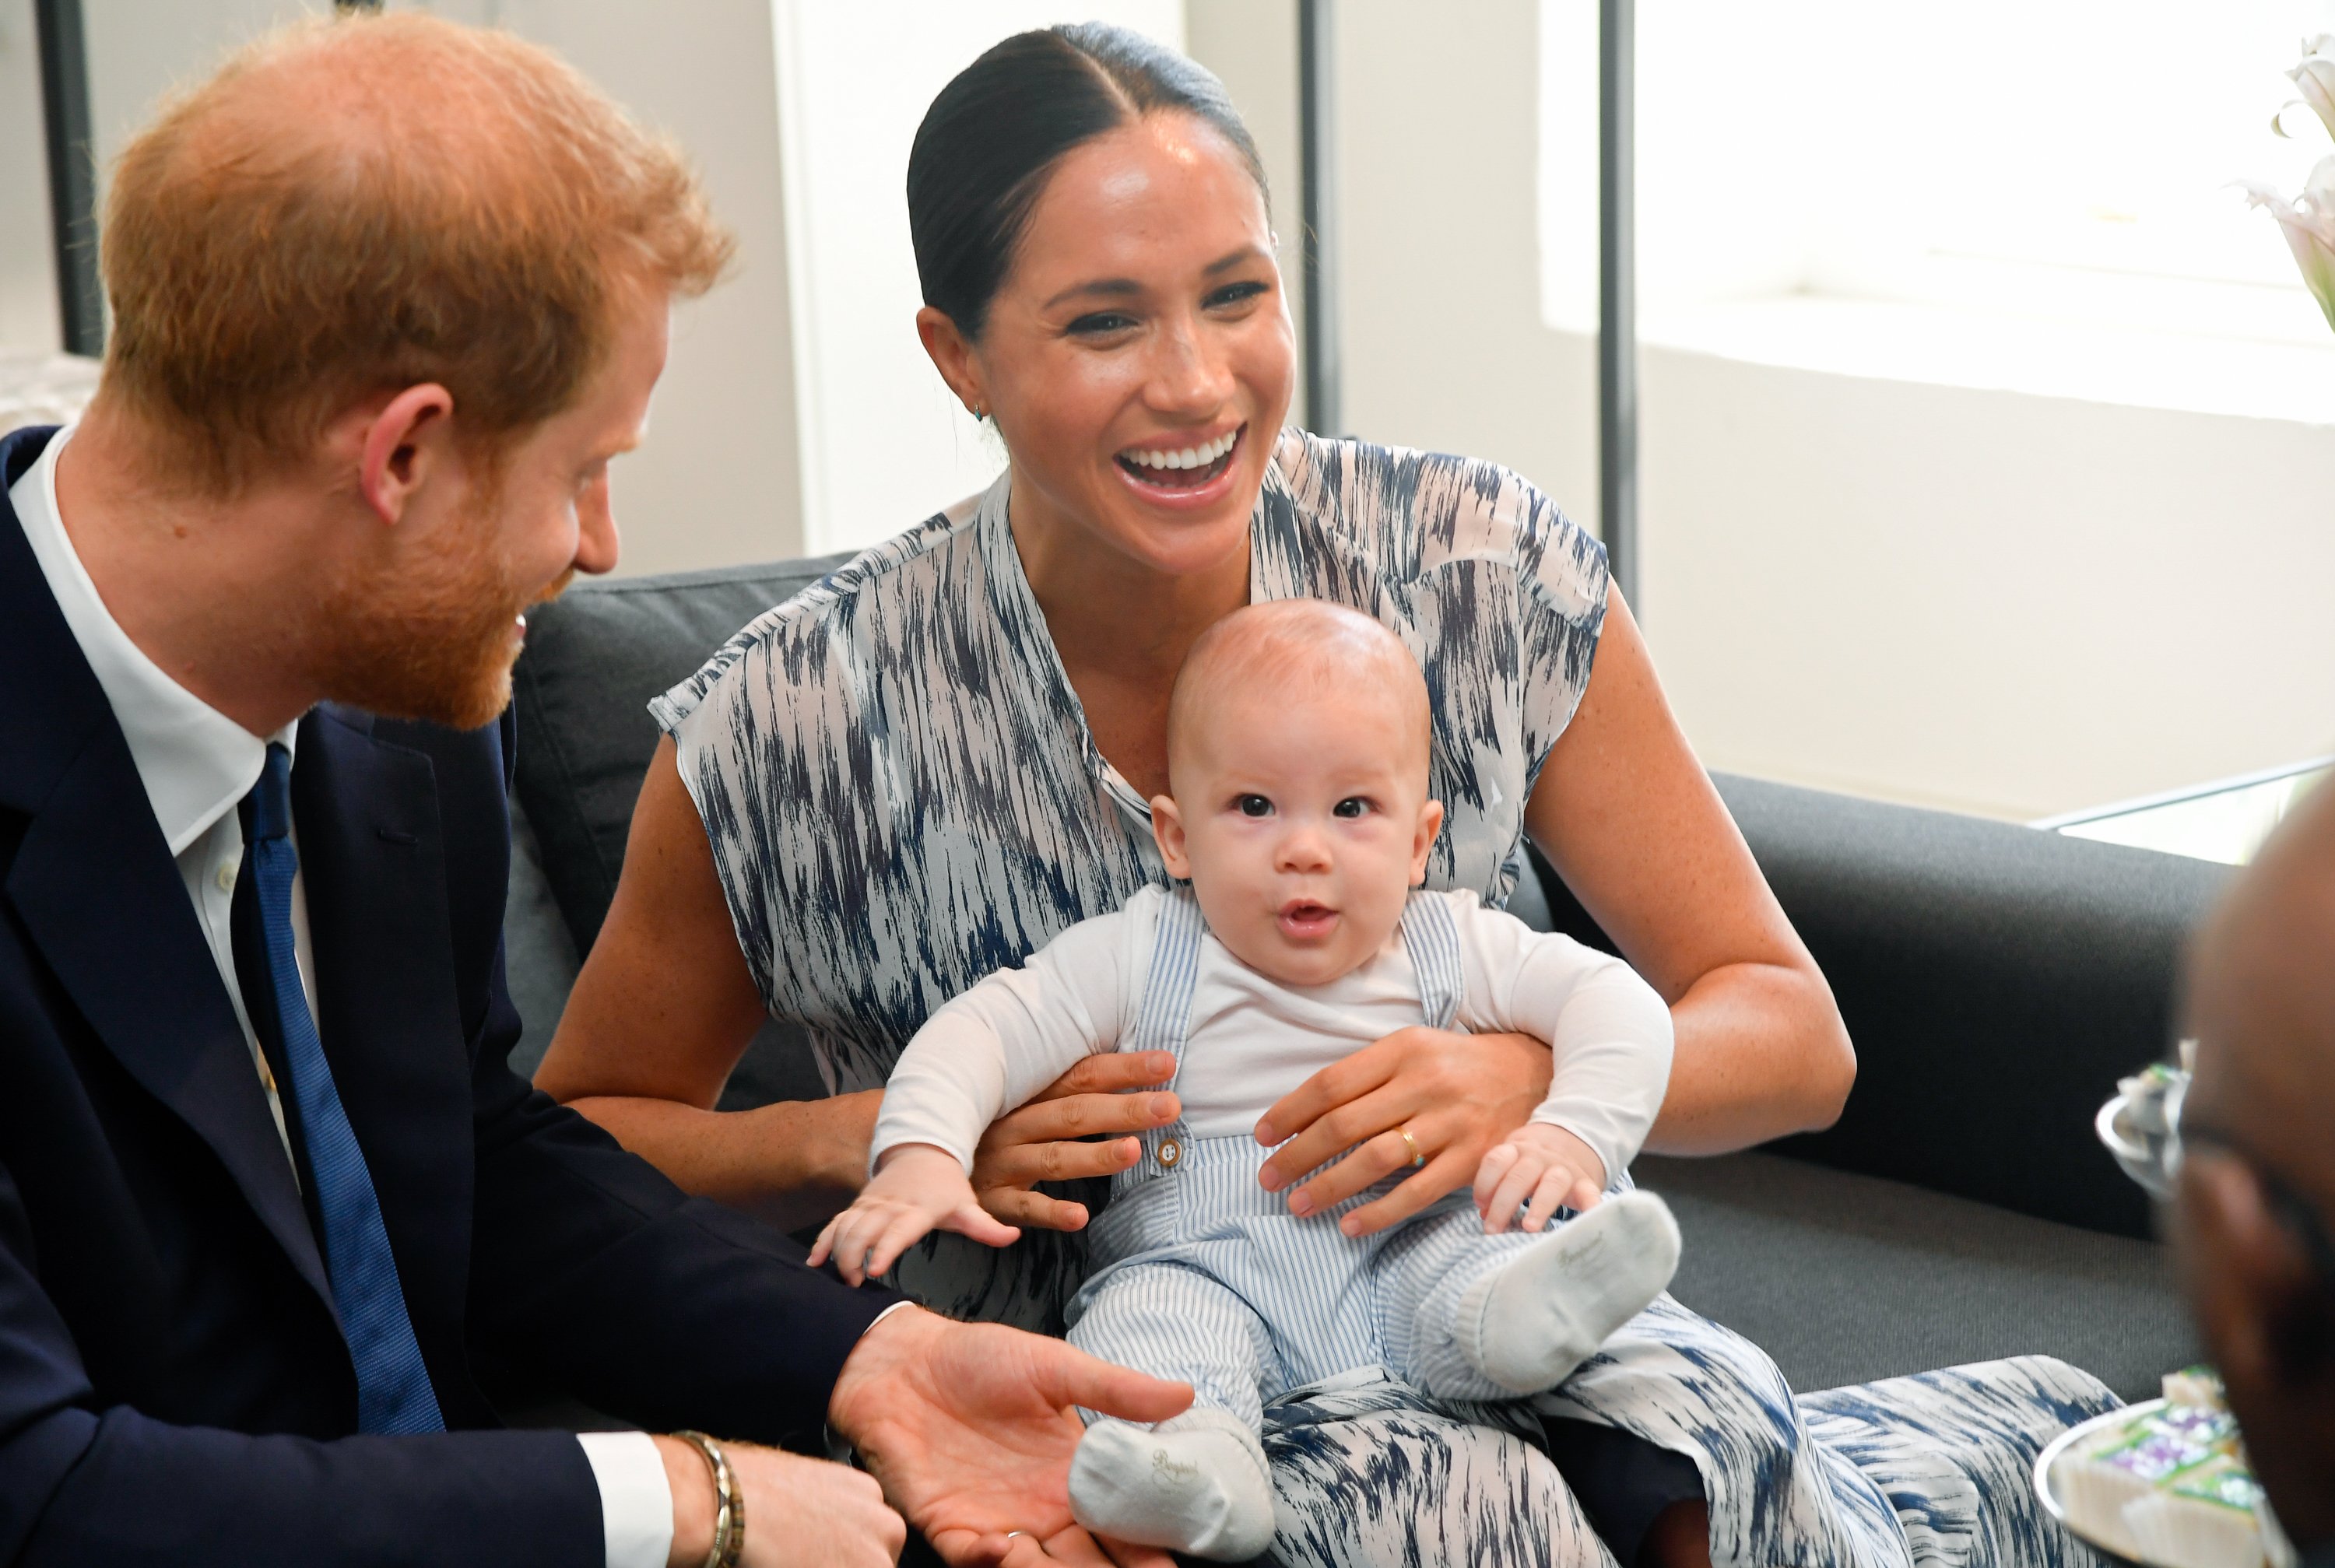 Prince Harry, Meghan Markle and their son Archie Mountbatten-Windsor during a meeting with Archbishop Desmond Tutu and his daughter Thandeka Tutu-Gxashe at the Desmond & Leah Tutu Legacy Foundation in Cape Town, South Africa | Photo: Toby Melville/Pool/Samir Hussein/WireImage